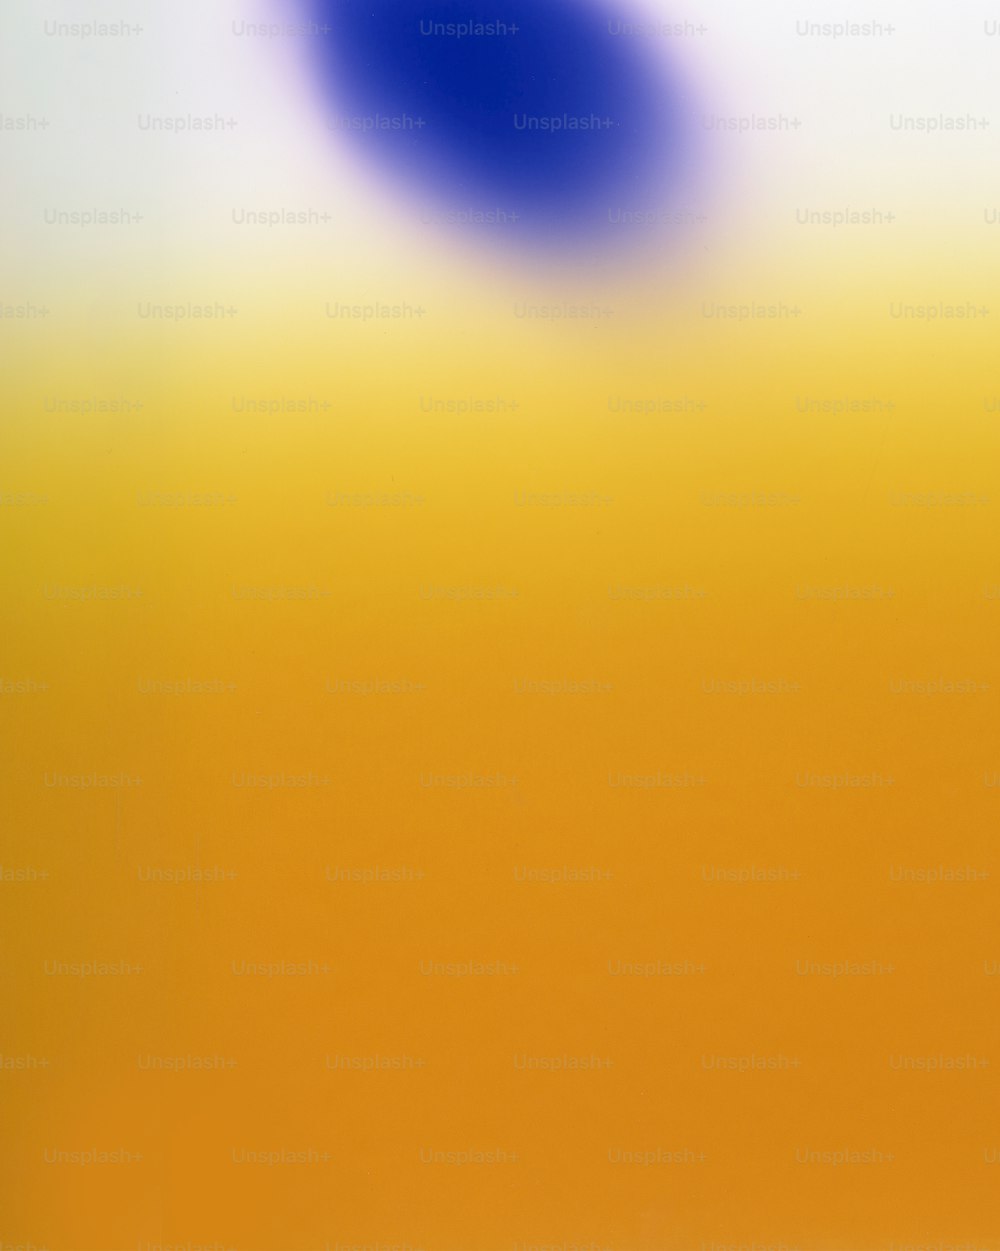 a blurry image of a yellow and blue background